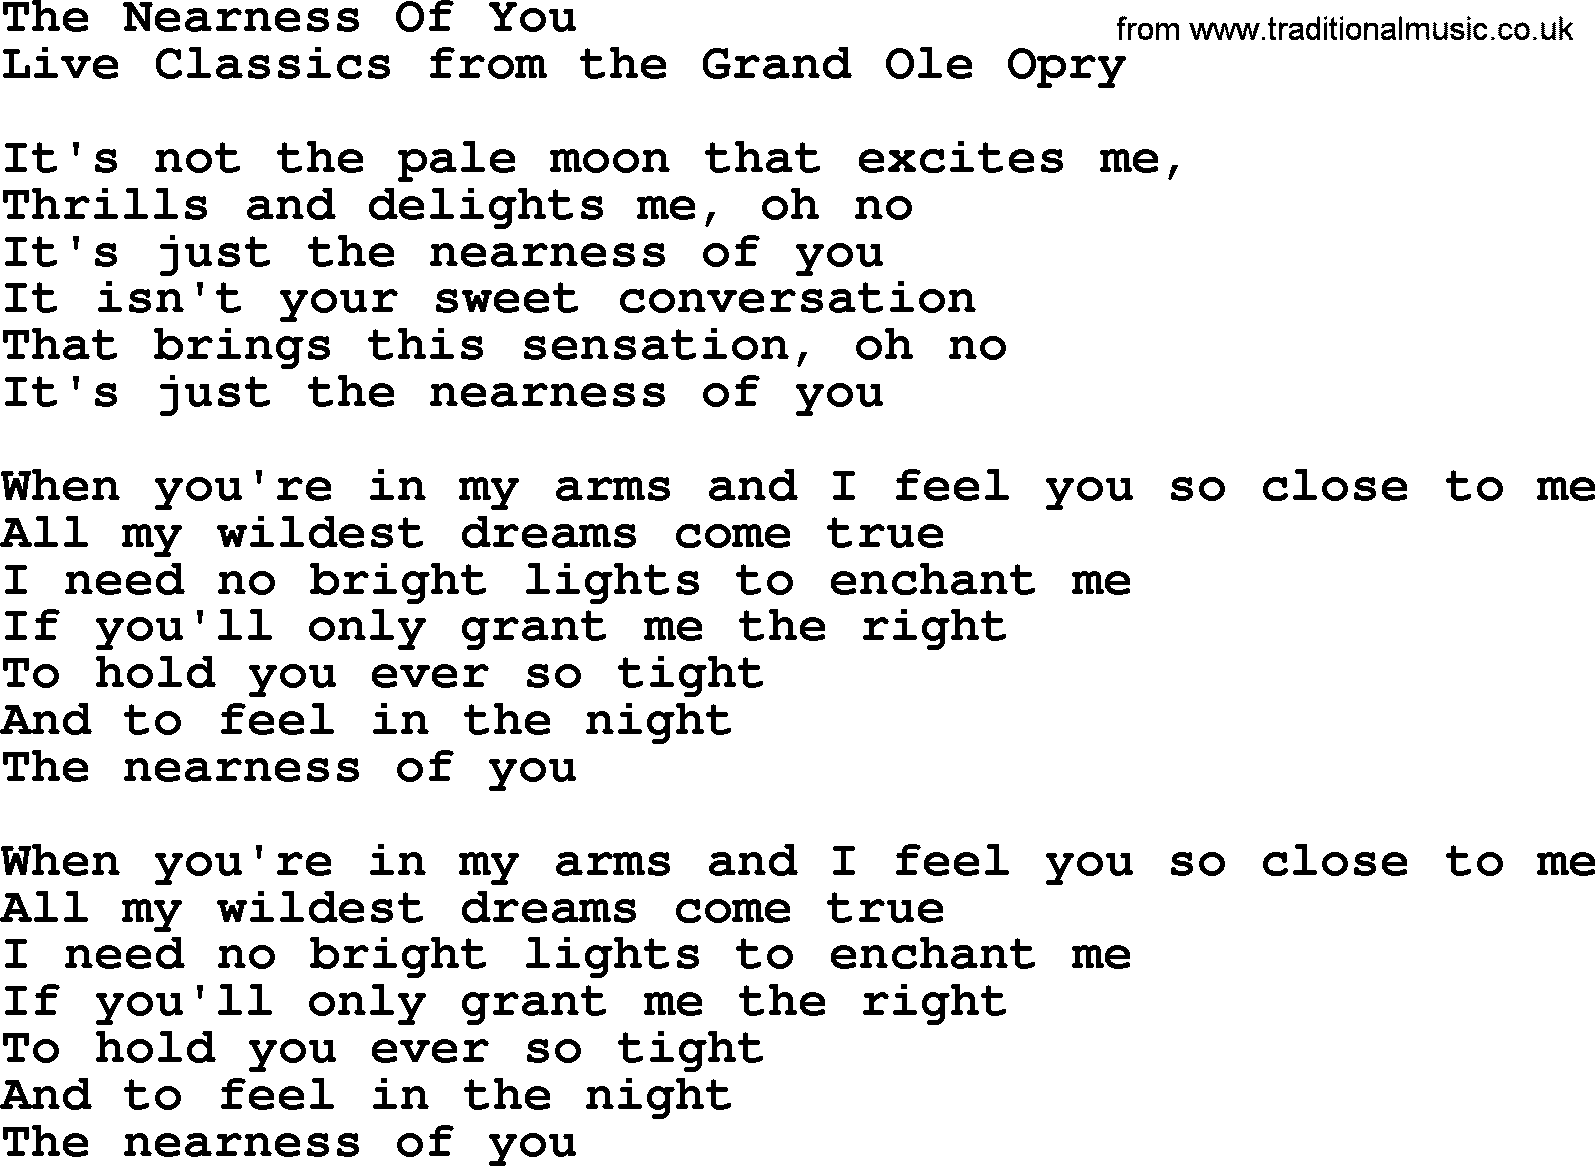 Marty Robbins song: The Nearness Of You, lyrics